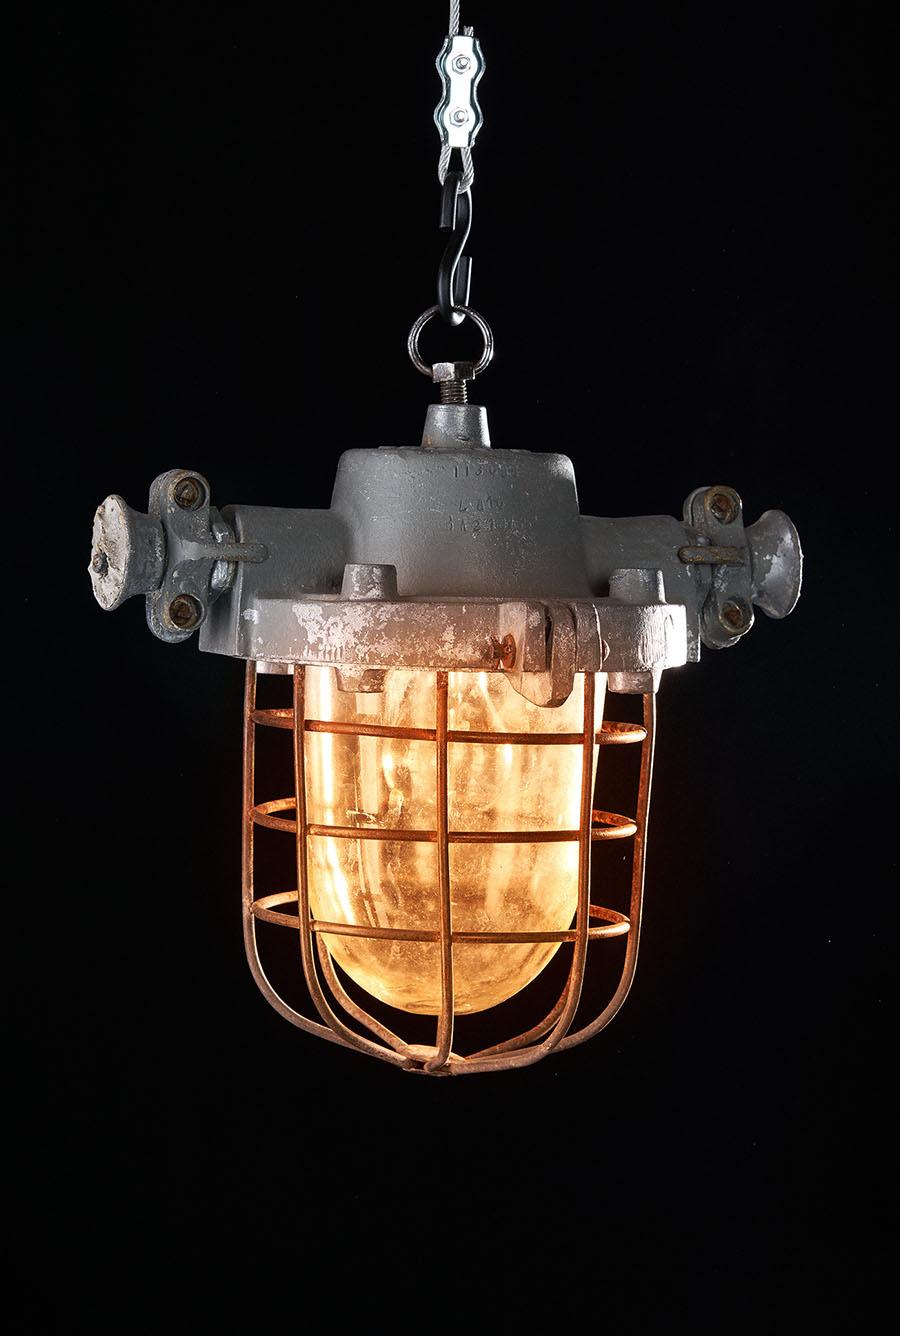 Primary use
This indoor lamp was designed to illuminate factory and workshop spaces, sport halls 
and other industrial rooms, where there was dustiness and a chance of a mechanical 
damage.
Explosion-proof luminaires were designed to illuminate gas